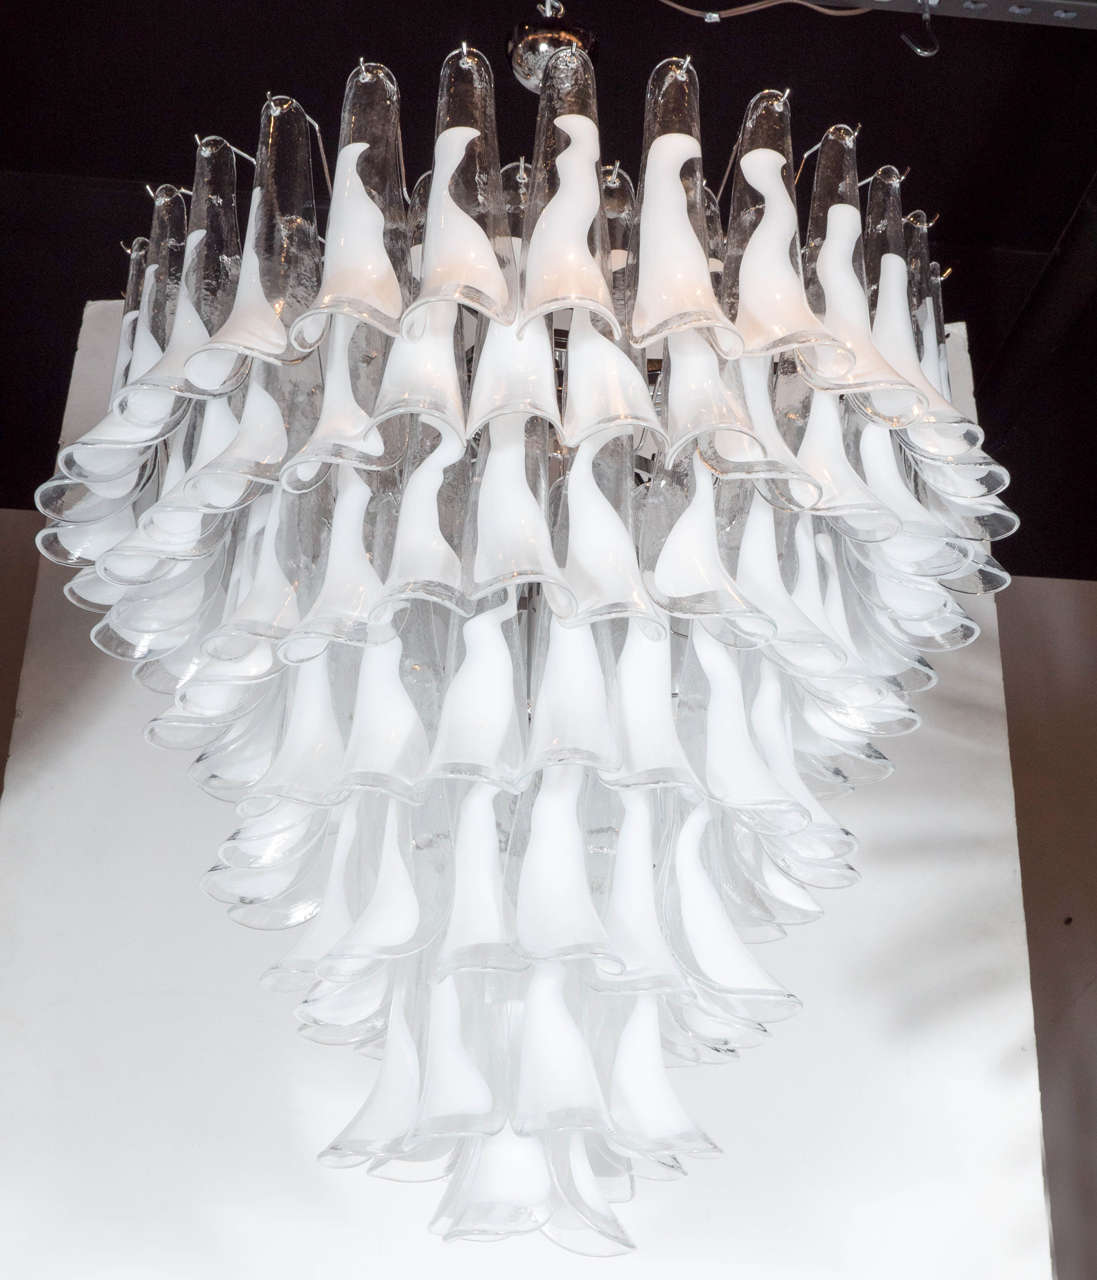 This stunning Modernist feather chandelier was handblown in Murano, Italy- the island off the coast of Venice renowned for centuries for its superlative glass production. Realized in the manner of Vistosi, the chandelier offers seven tiers of